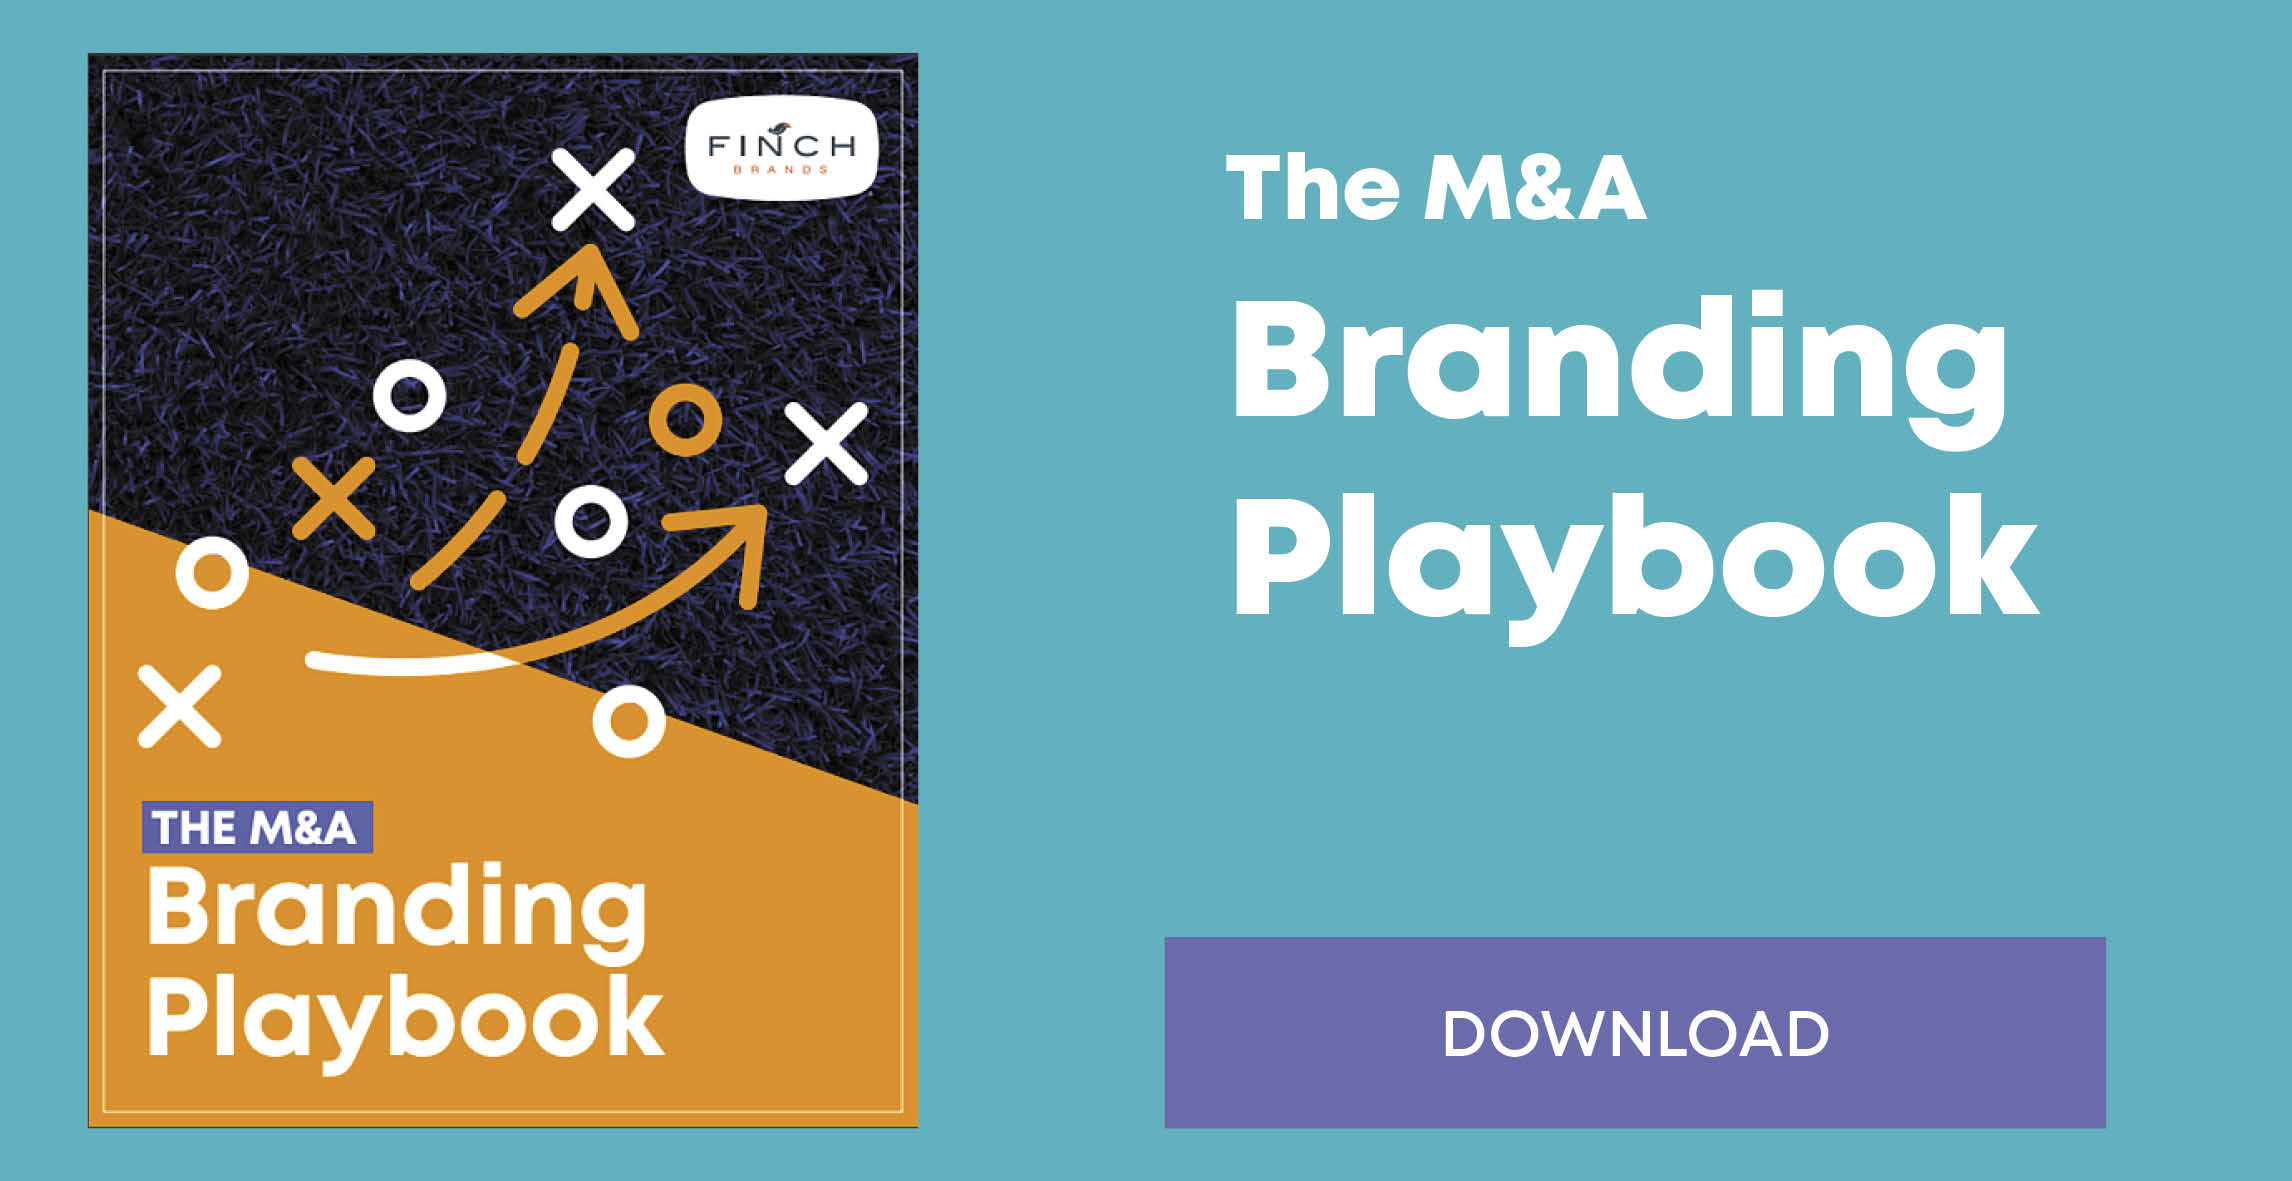 Download The M&A Branding Playbook